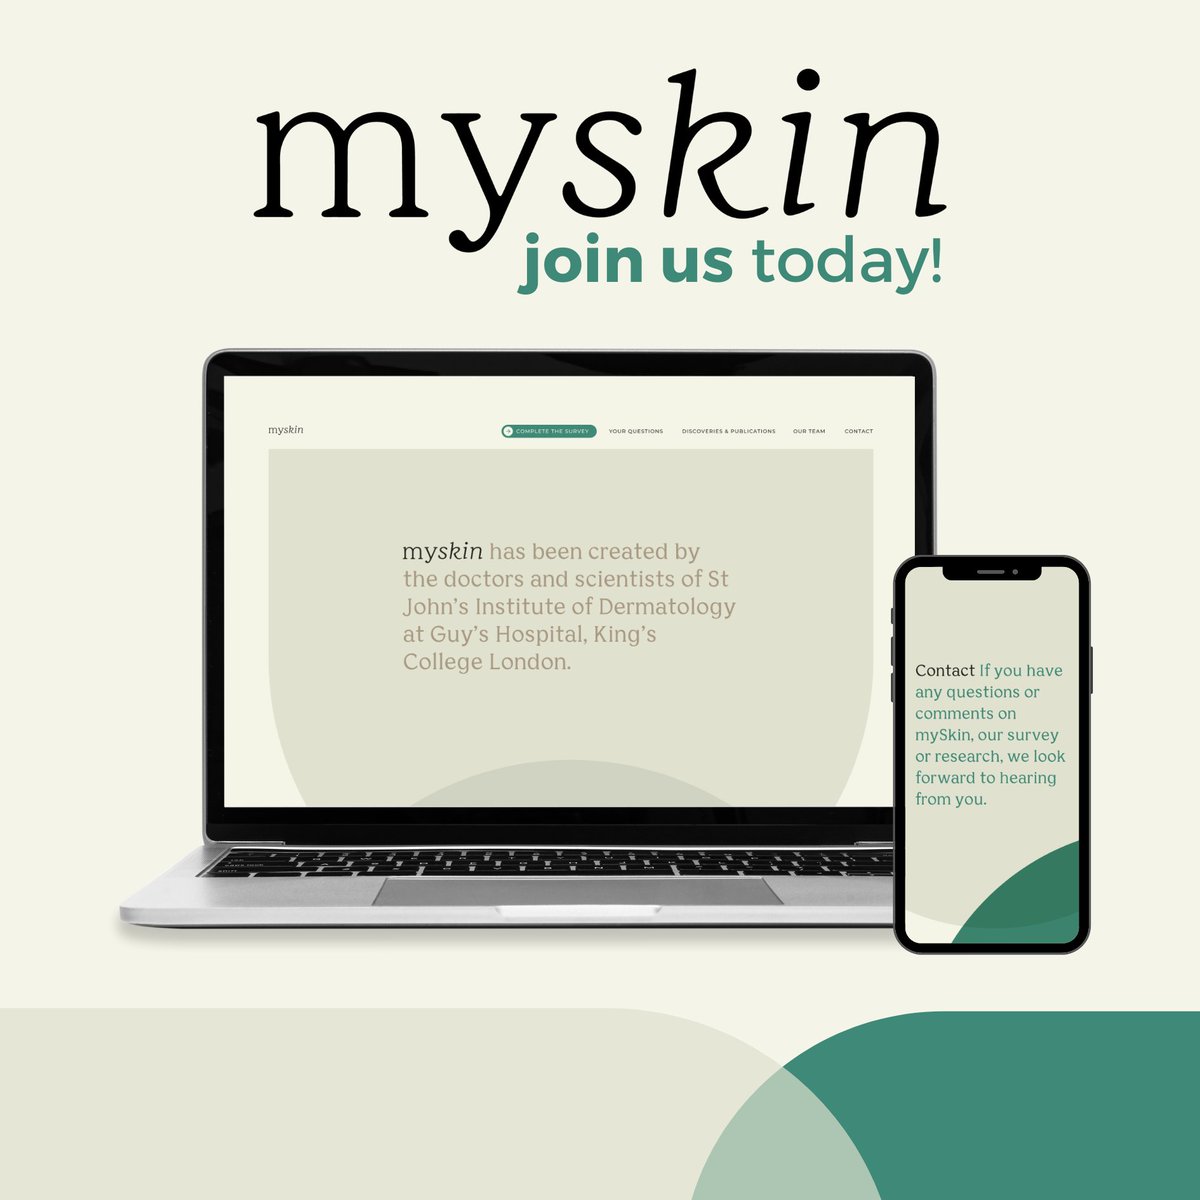 Have you taken the @myskinstudy survey yet? mySkin has been created by the doctors and scientists of St John’s Institute of Dermatology at Guy’s Hospital, King’s College London and aims to understand how and why psoriasis changes over time. Find out more ow.ly/Opio50Pawf0